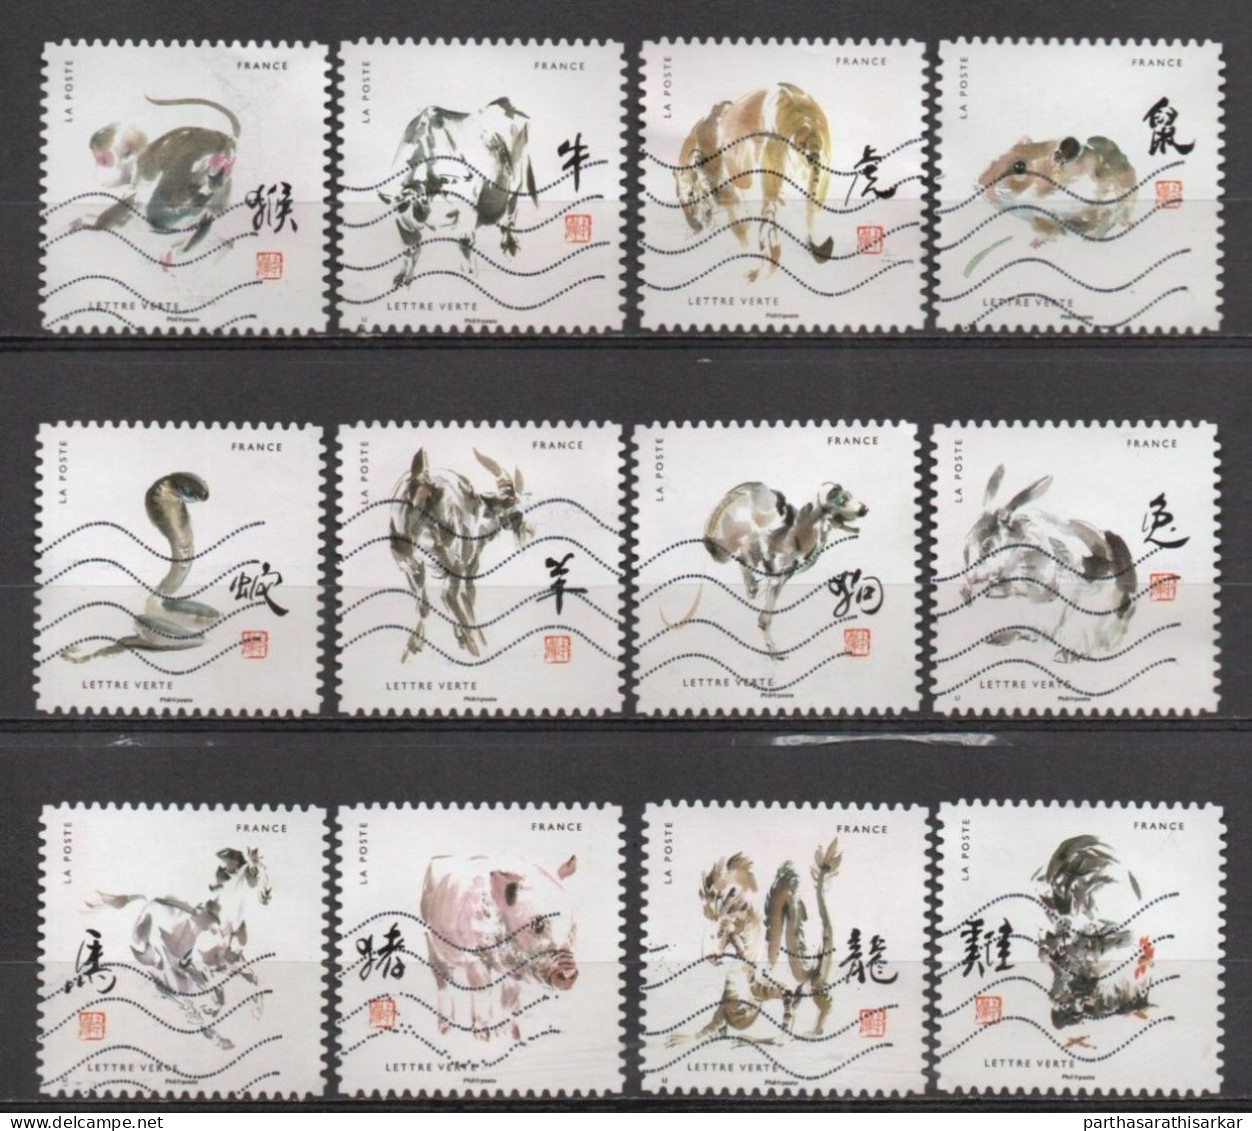 FRANCE 2017 CHINESE ZODIAC SIGNS COMPLETE SET USED RARE - Gebruikt